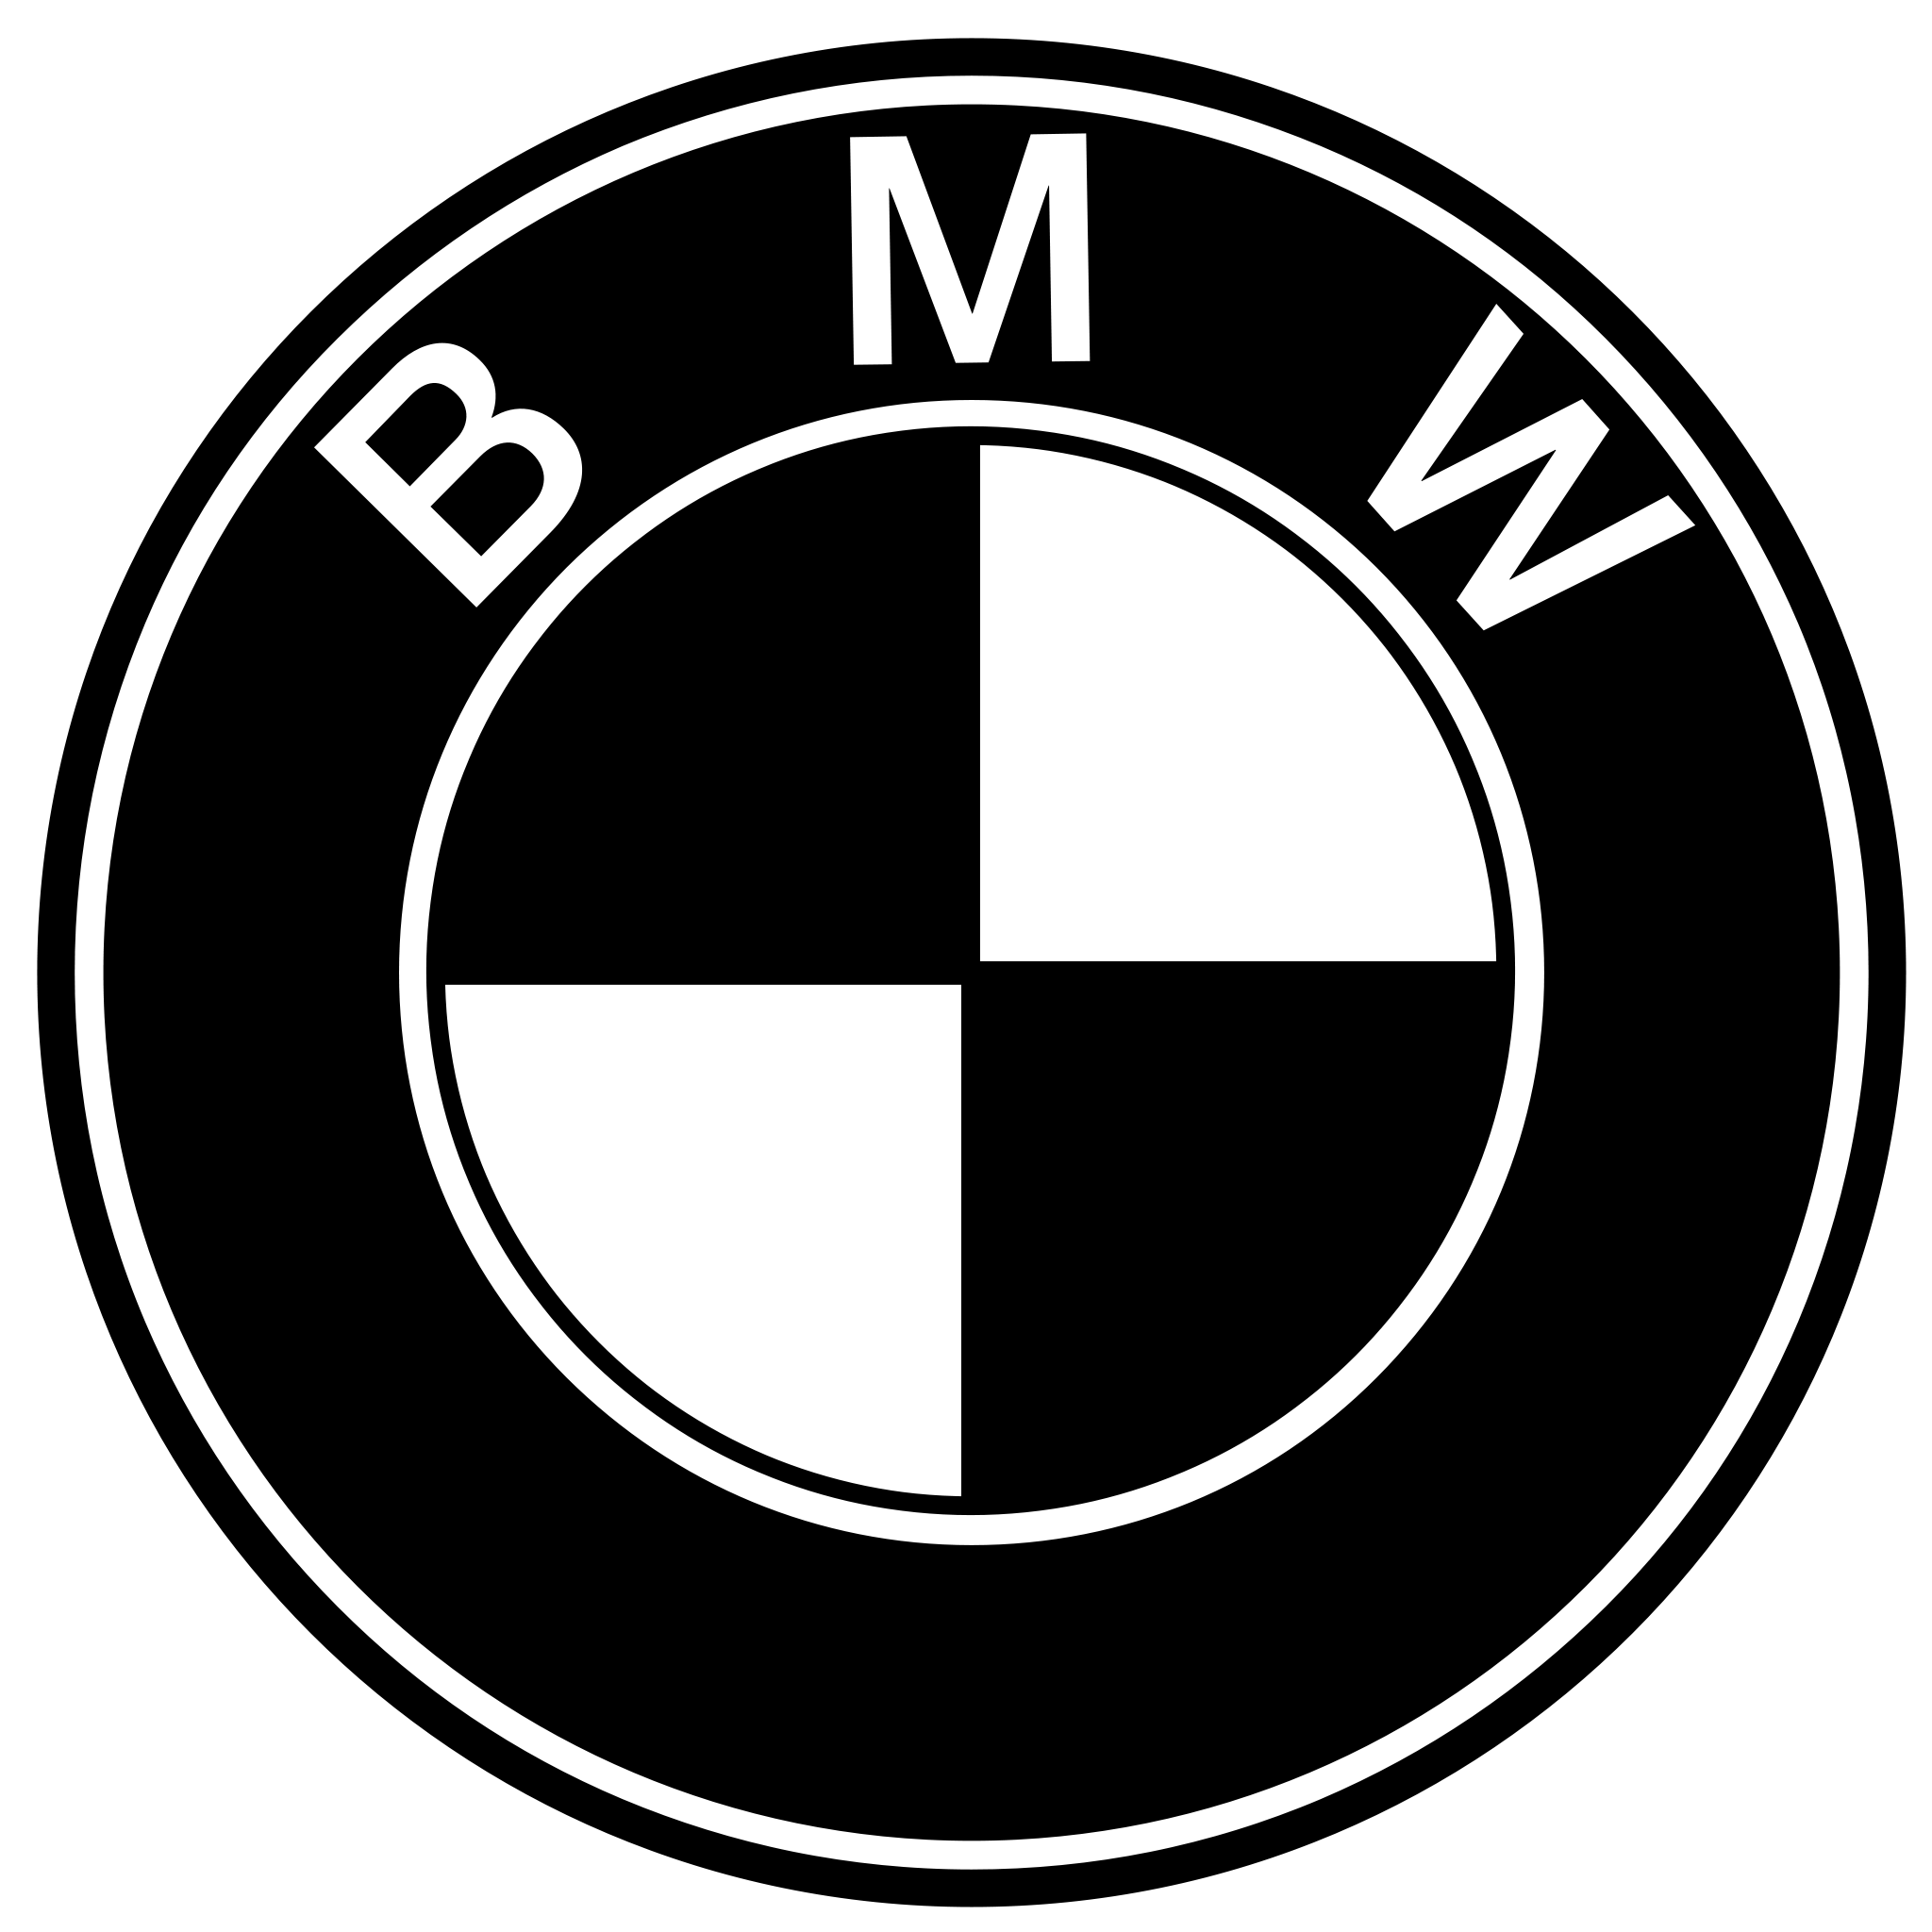 Download Bmw Logo Competition PNG Image with No Background - PNGkey.com